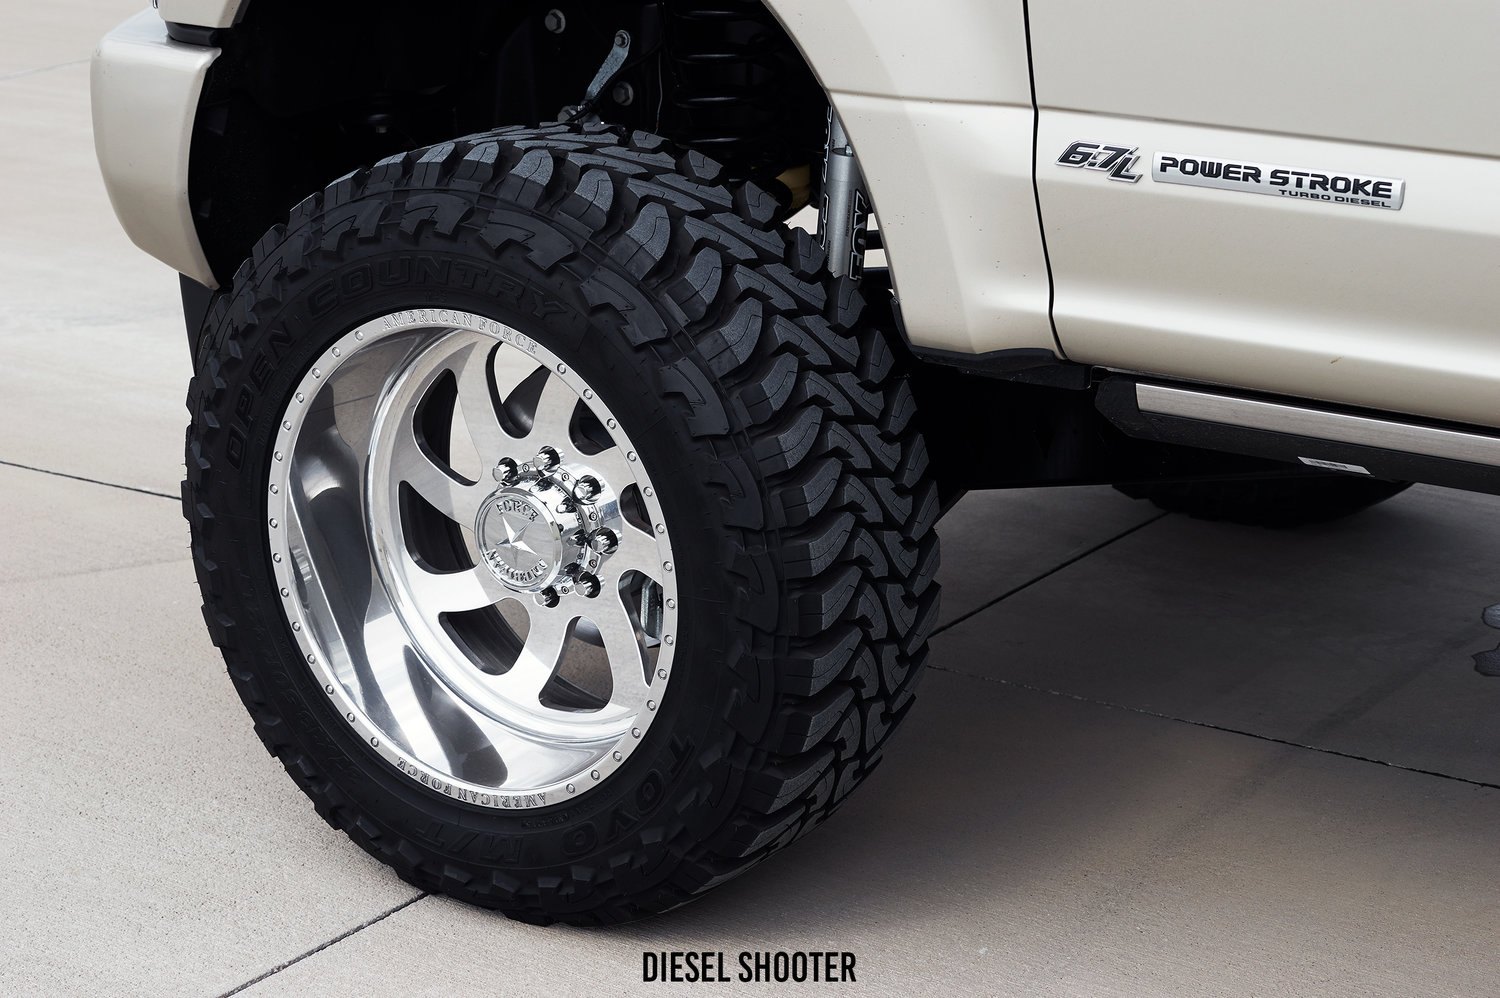 Lifted Ford Powerstroke on Custom Wheels - Photo by Diesel Shooter